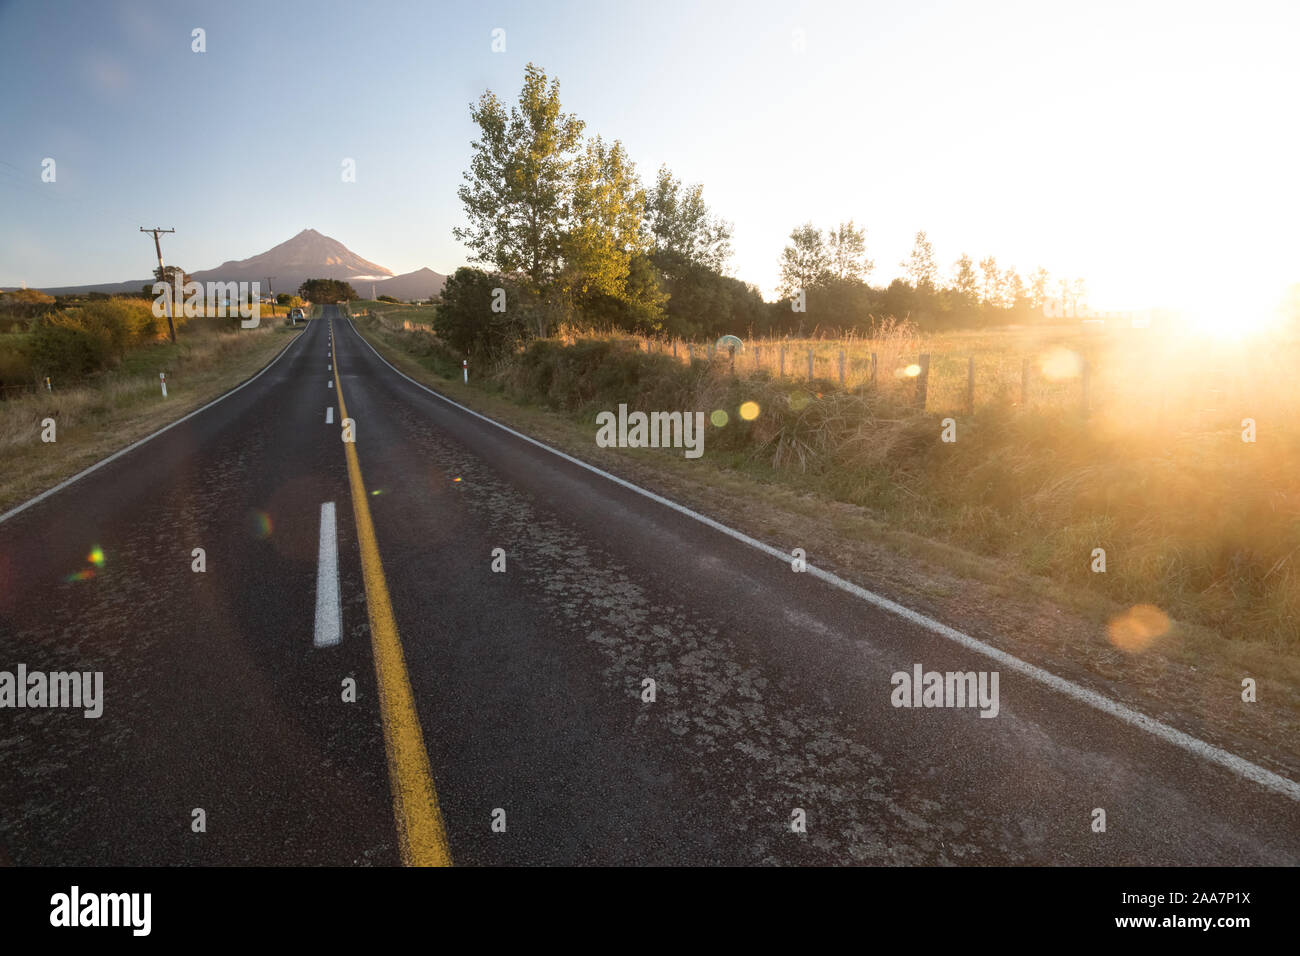 Wide angle view on Mount Taranaki (Mount Egmont) in New Zealand with road leading to it. Taken during sunset with sun rays and lens flare visible. Stock Photo